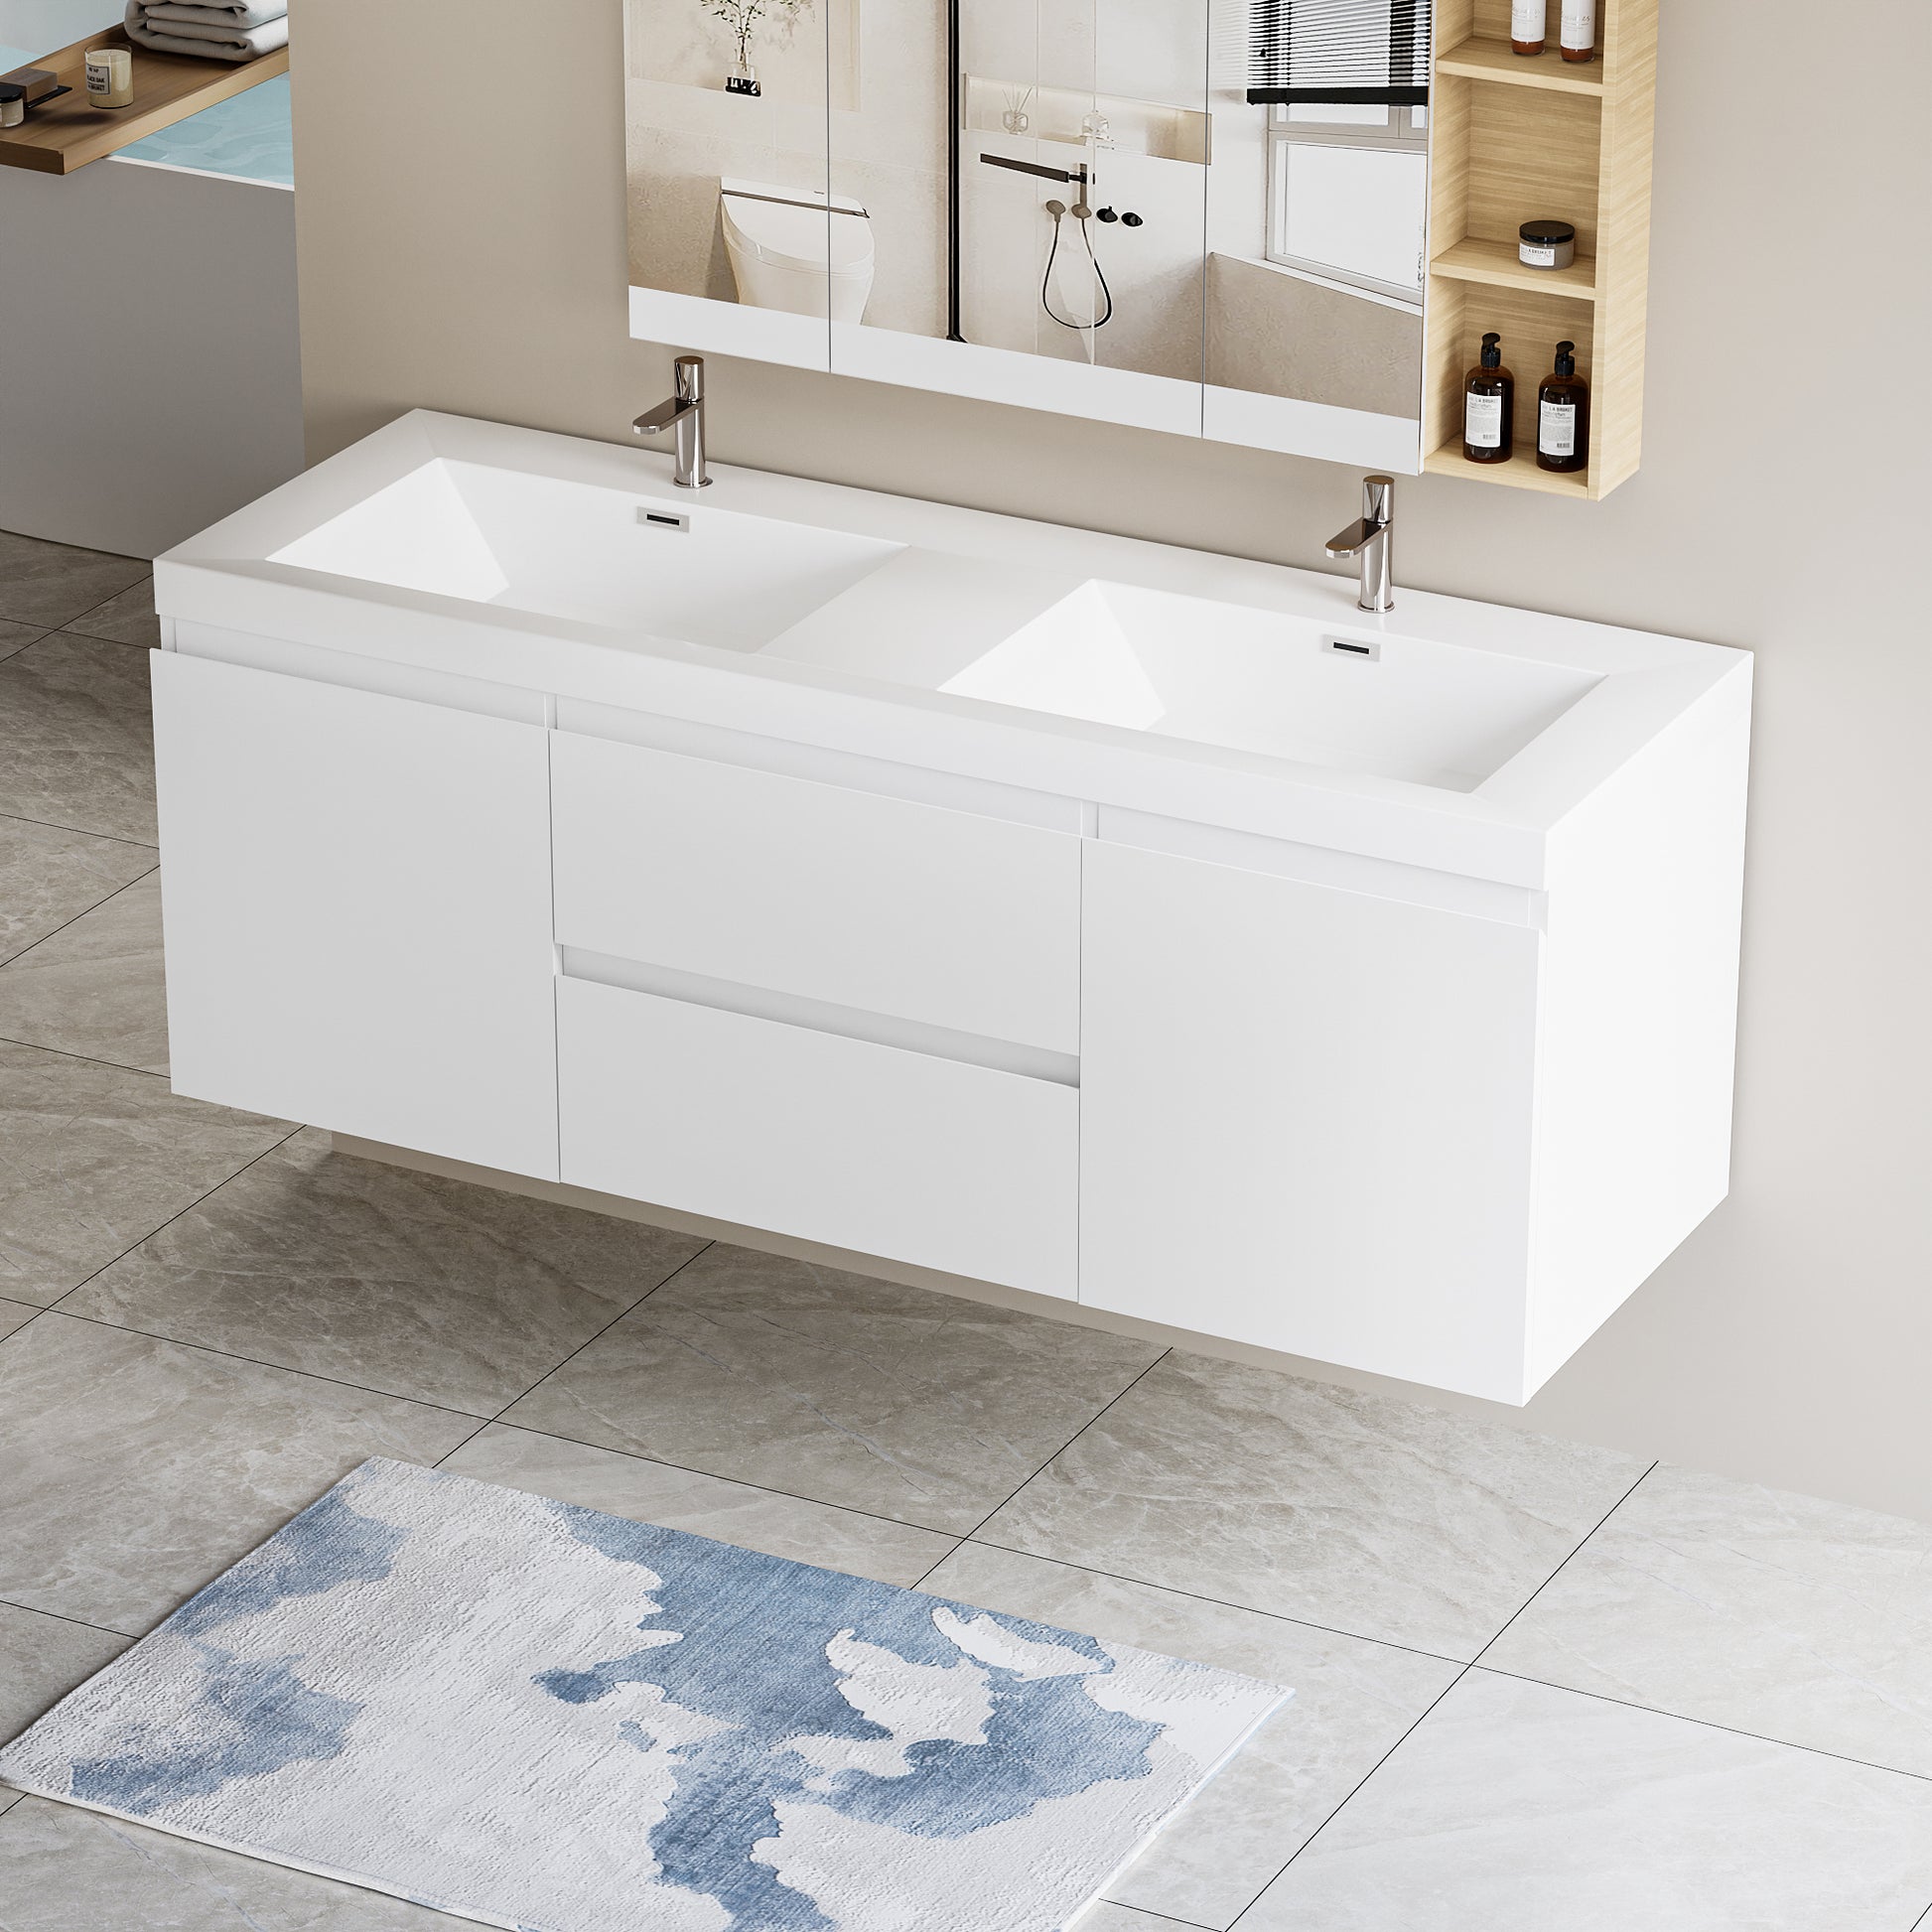 60" Floating Bathroom Vanity with Sink, Modern Wall 2-white-2-wall mounted-mdf